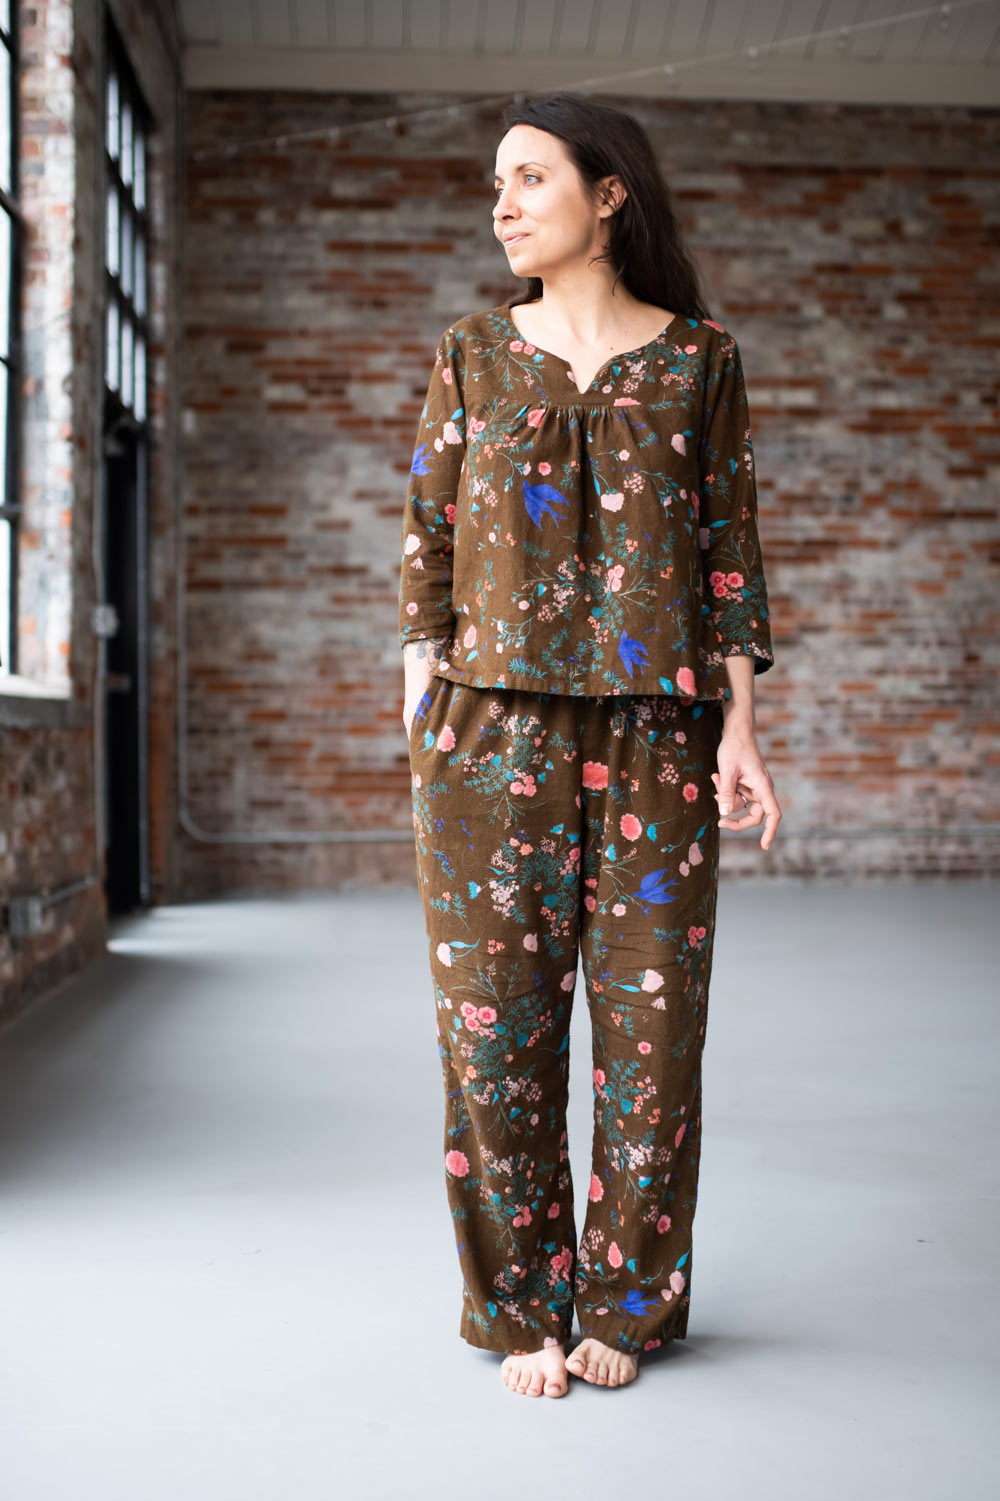 Woman wearing the Nocturne Pajamas sewing pattern from Sew Liberated on The Fold Line. A PJ pattern made in cottons, linens, hemp, flannel, rayon or silk charmeuse fabrics, featuring front and back yokes with gathers, V-notch at the neckline, slight high-